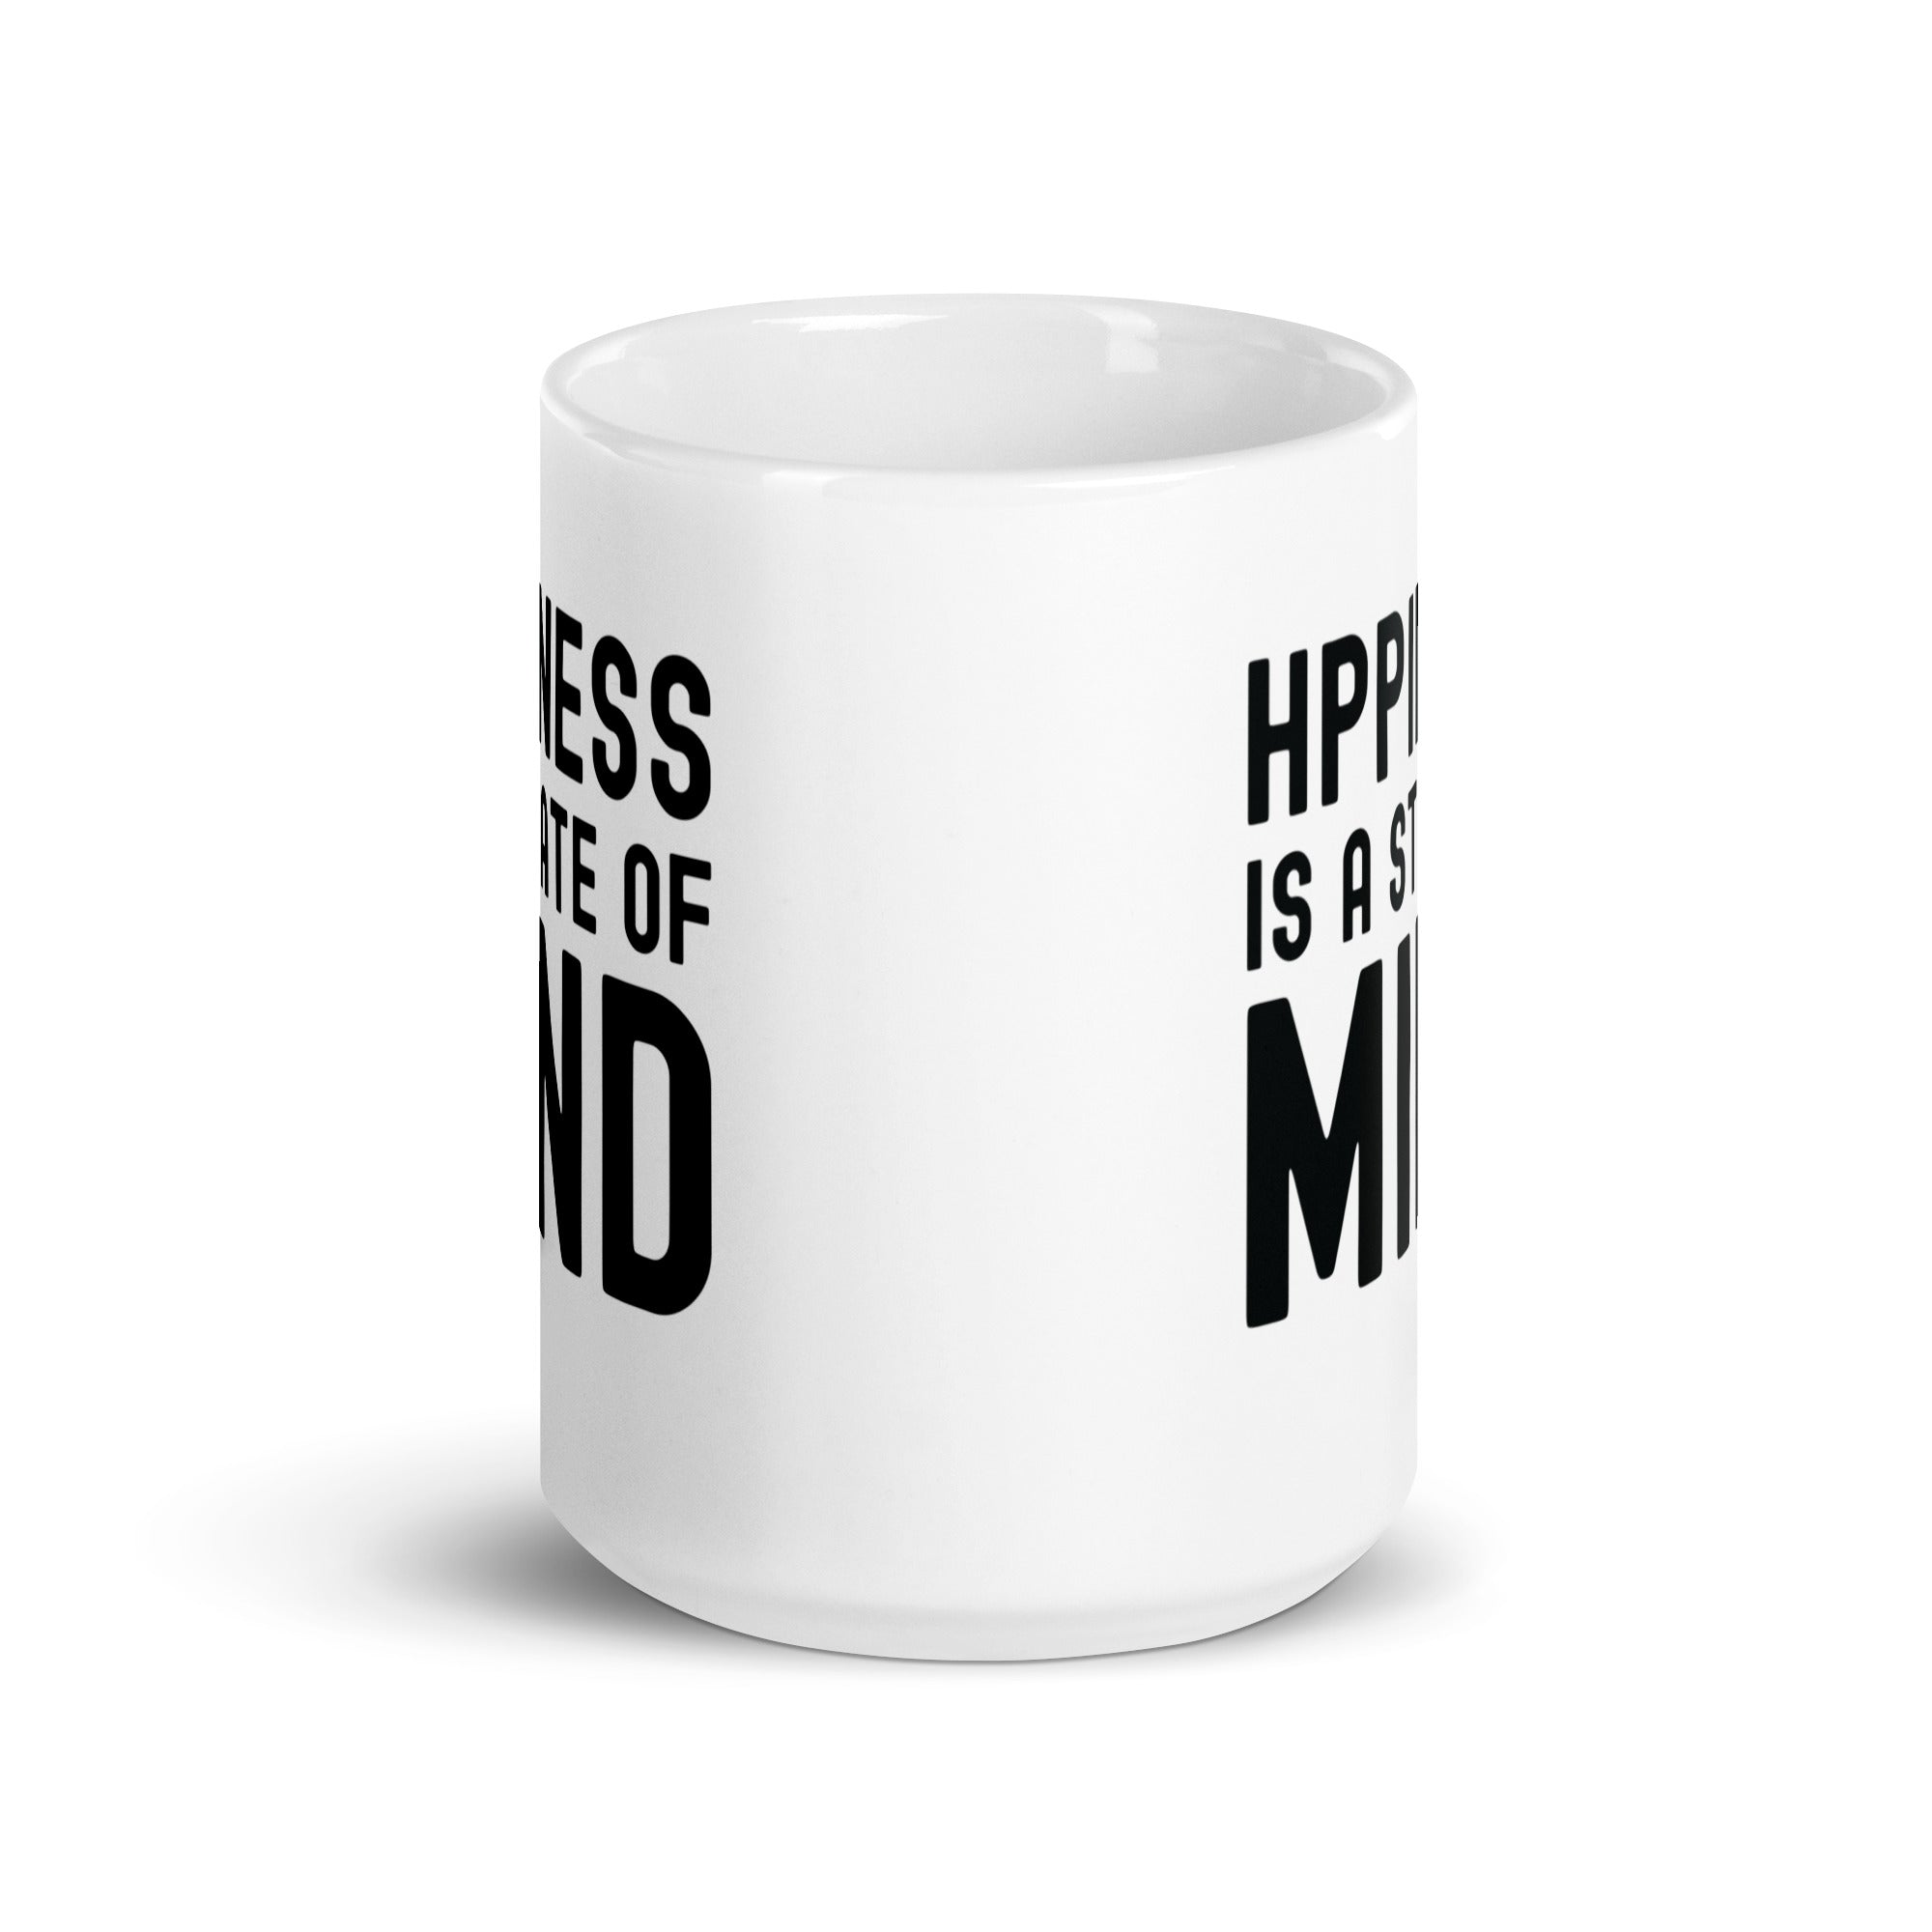 White glossy mug | Hppiness is a state of mind